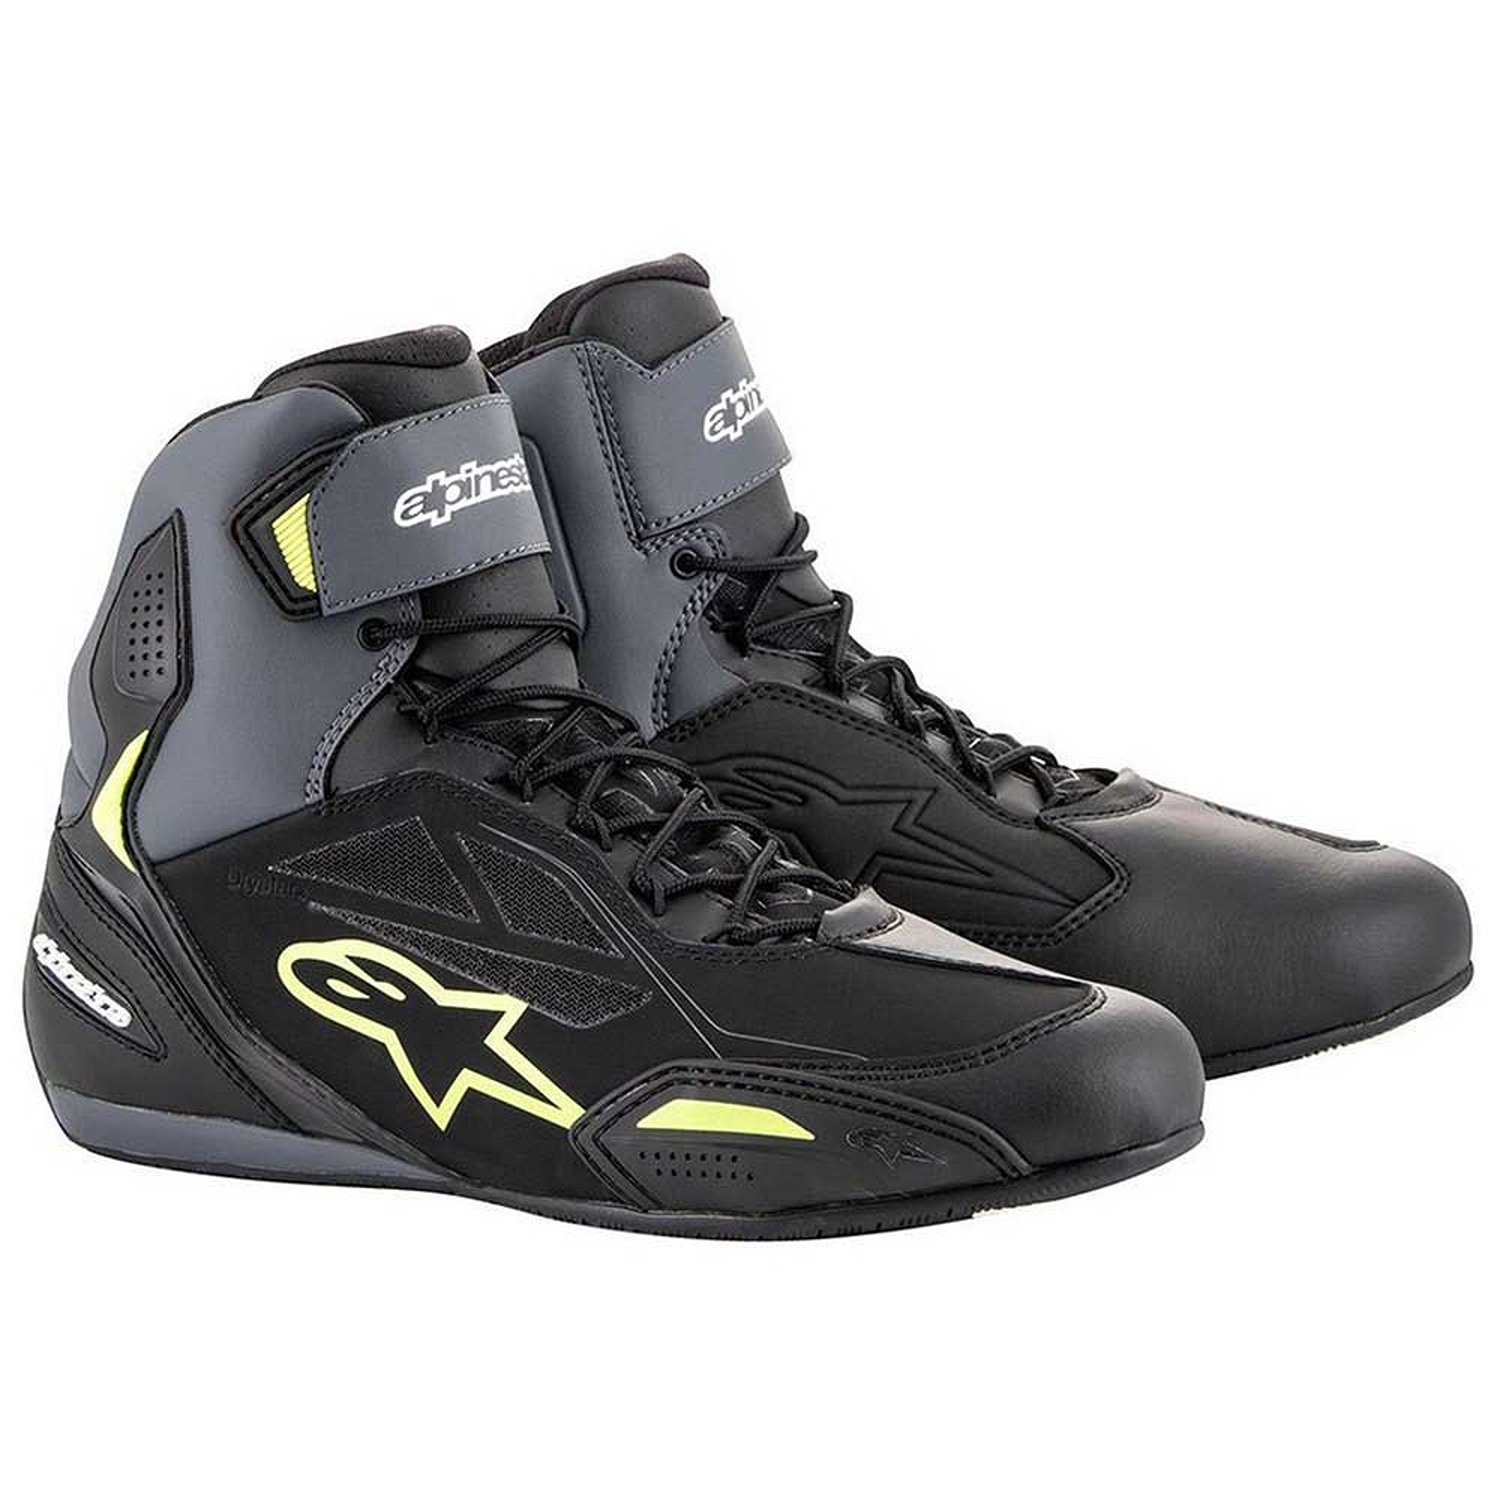 Image of Alpinestars Faster-3 Shoes Black Yellow Fluo Taille US 115